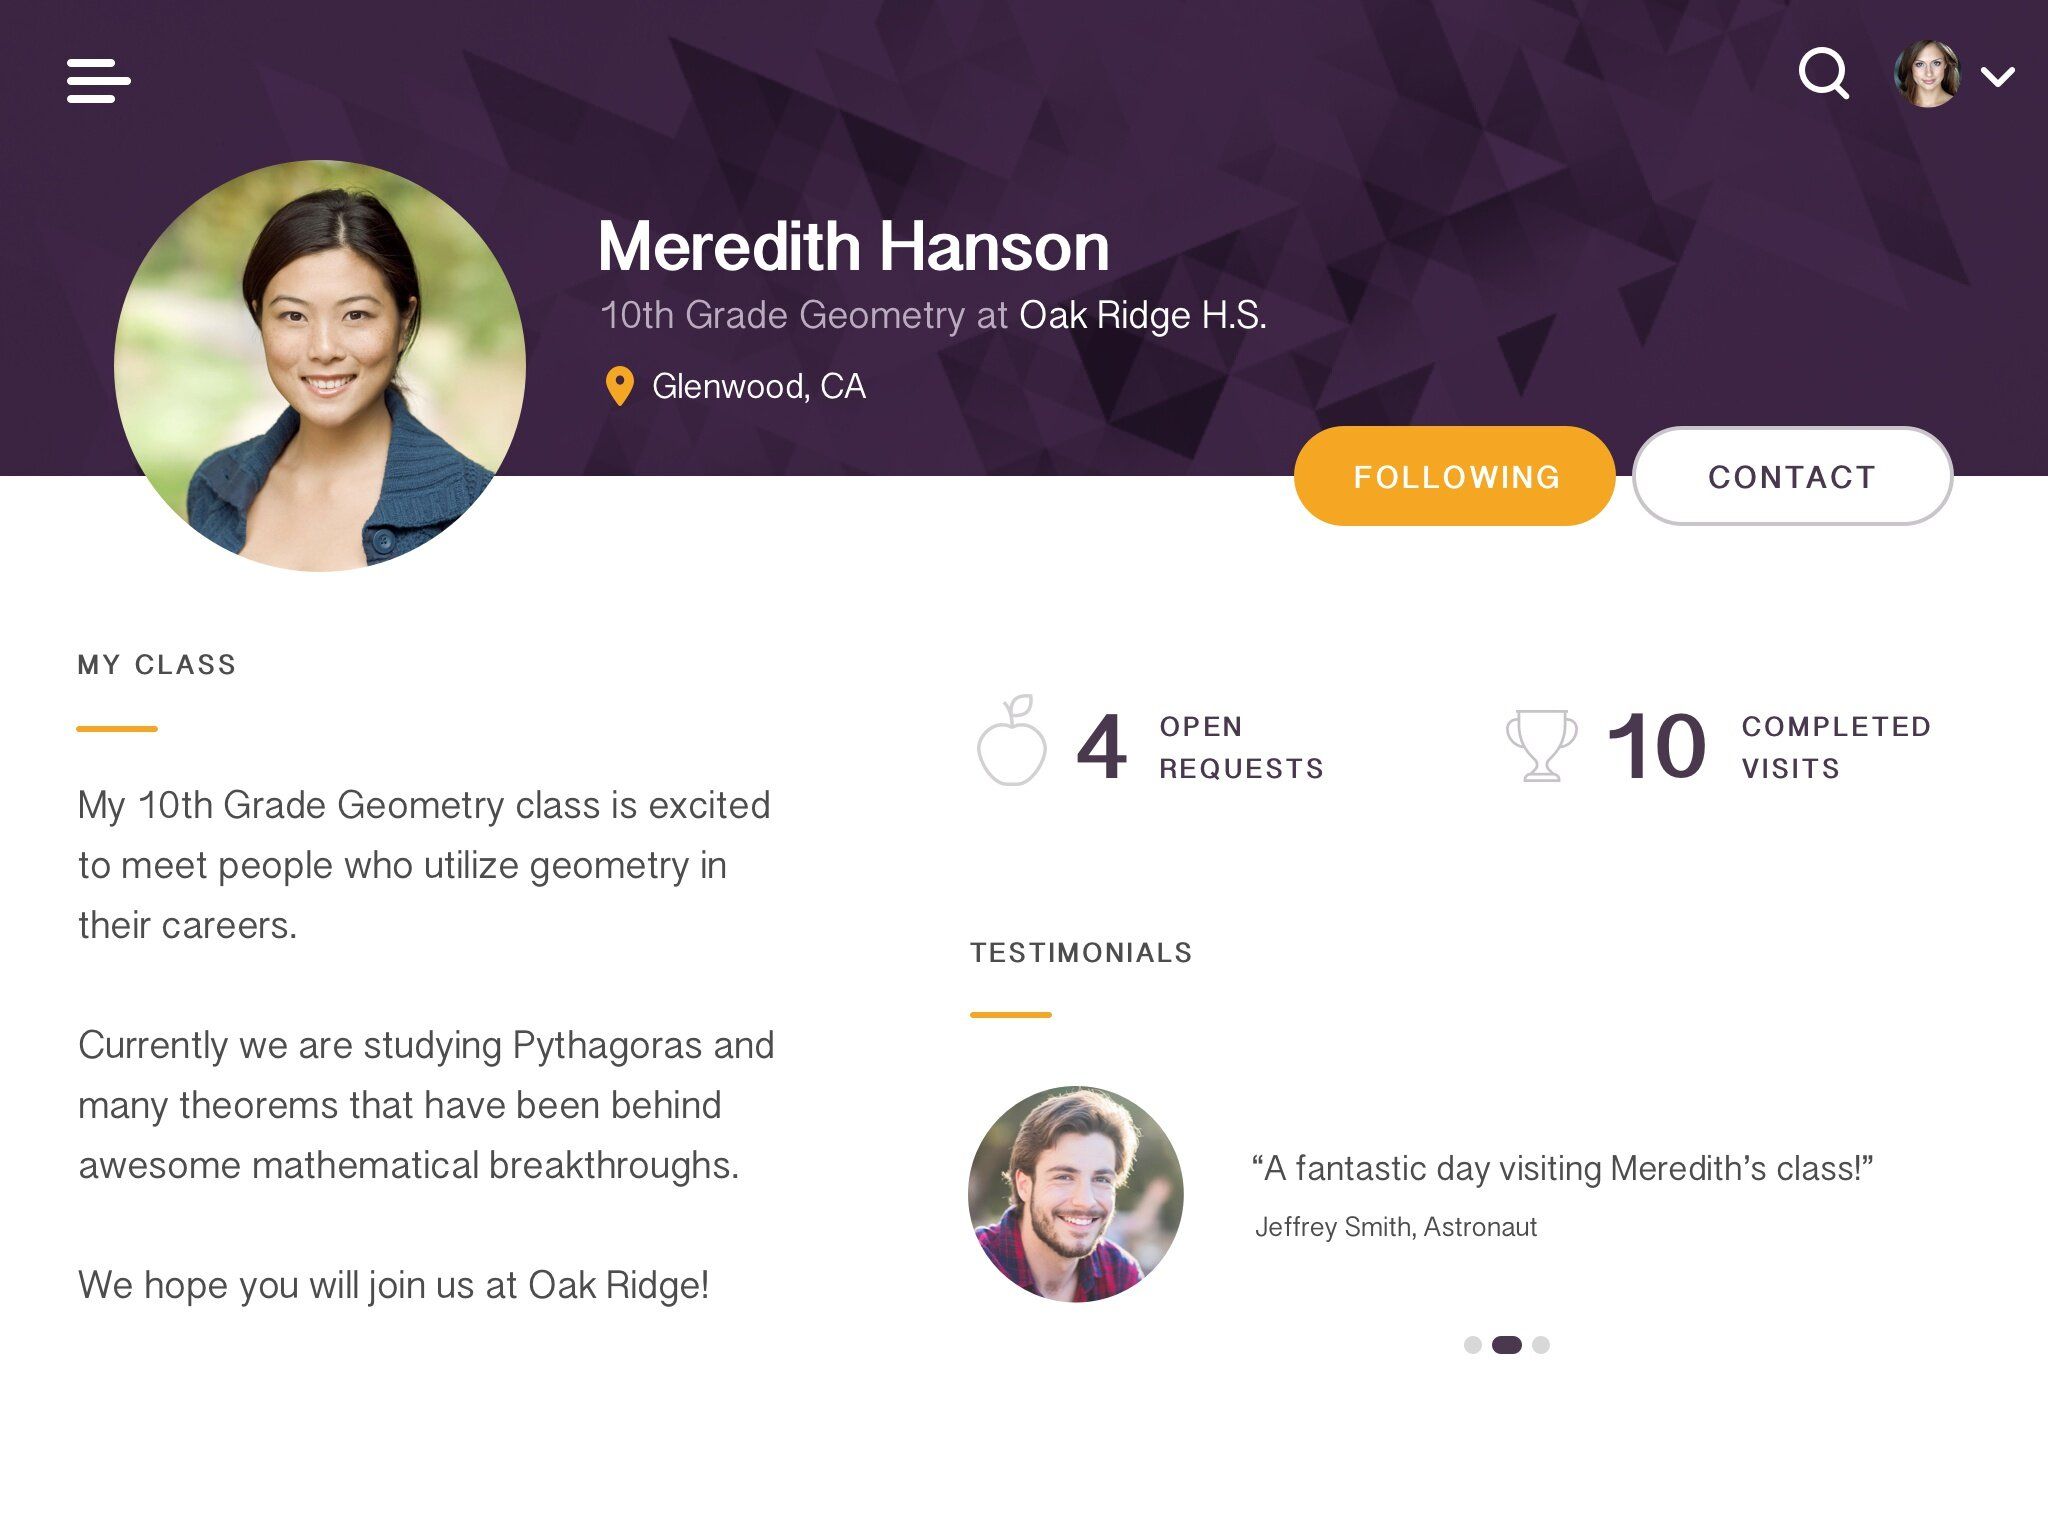 If you want to create an online training course that people will buy, the mentor’s profile should motivate 